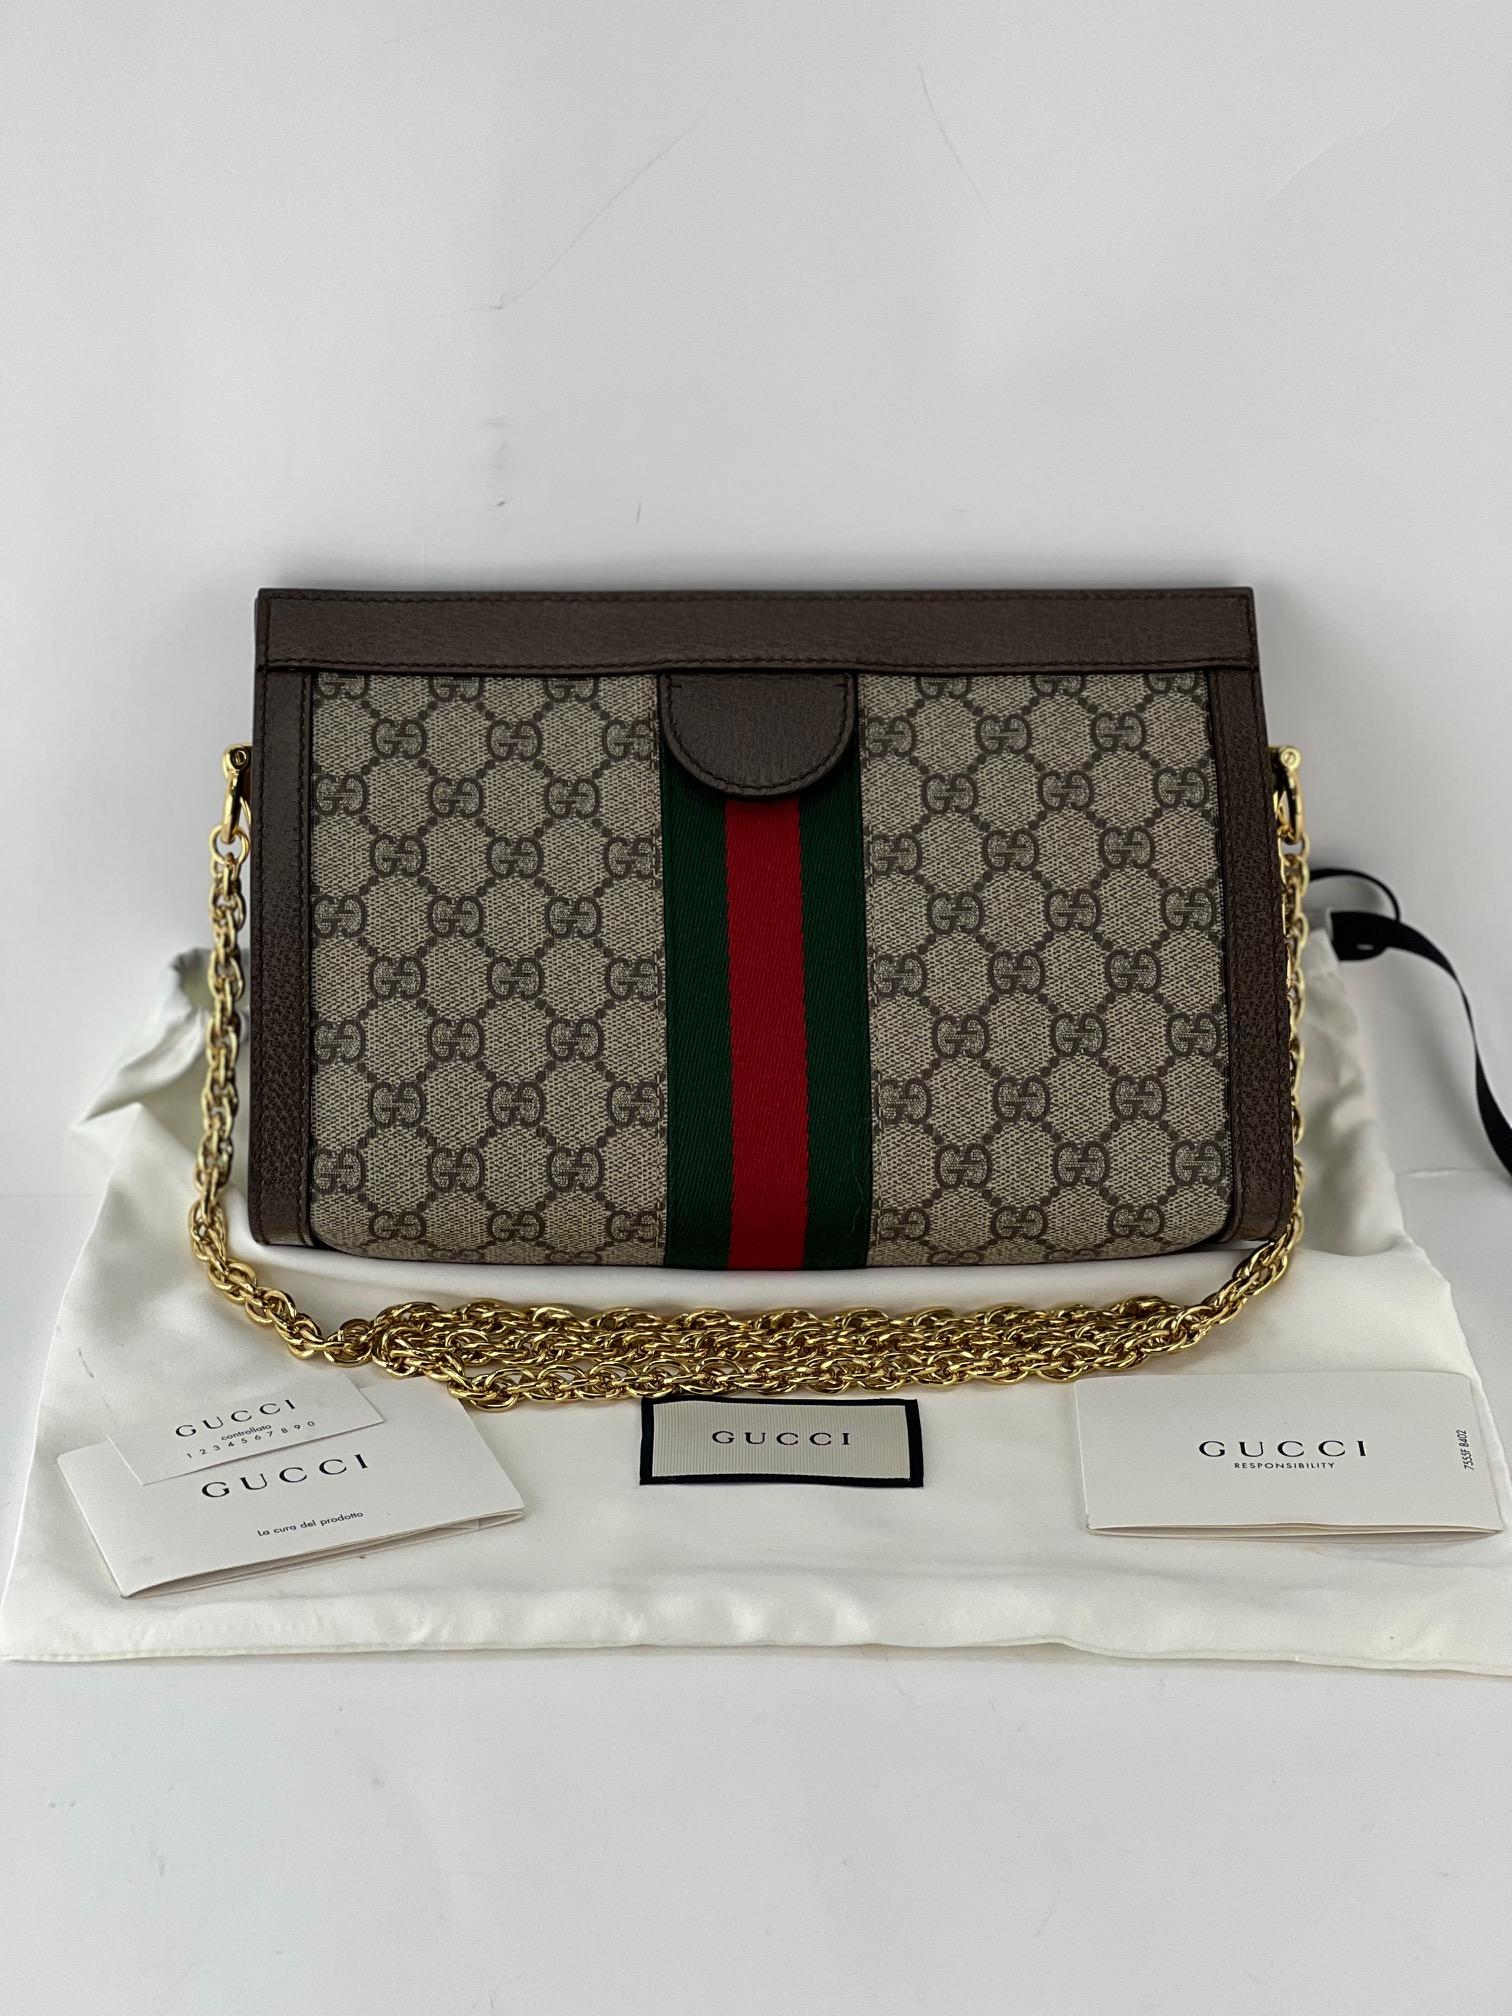 Pre-Owned  100% Authentic
Gucci GG Supreme Ophidia Small Monogram Web
RATING: A..Excellent, near mint, only slight
sign of wear
MATERIAL: Gg supreme monogram canvas, leather
CLOSURE: 4 magnetic tabs
HANDLE: golden attached strap, can
put inside bag